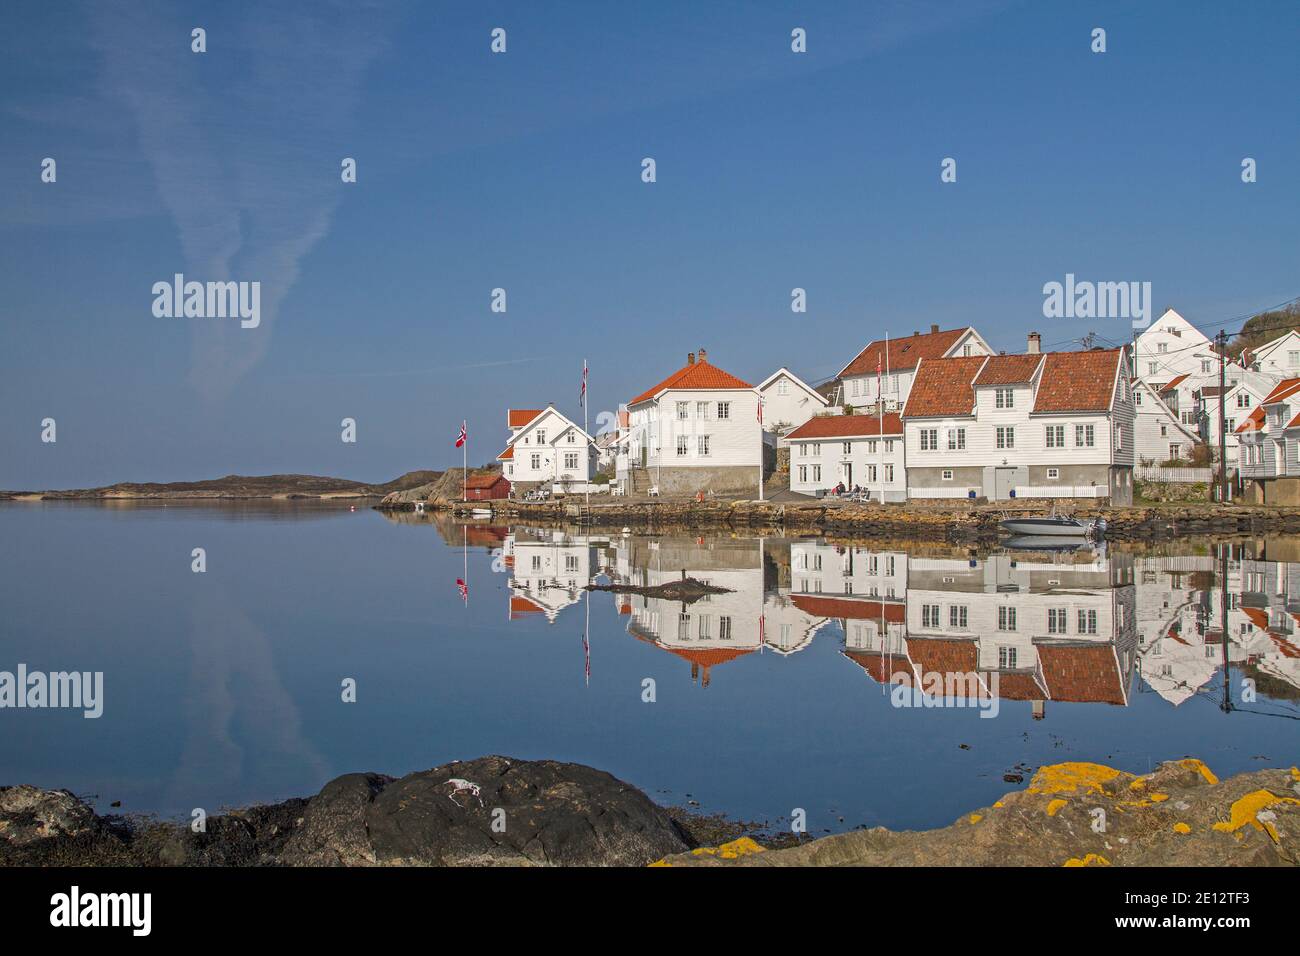 Loshavn - The Small Idyllic Village With Its White Wooden Houses Is Always Worth A Visit Stock Photo